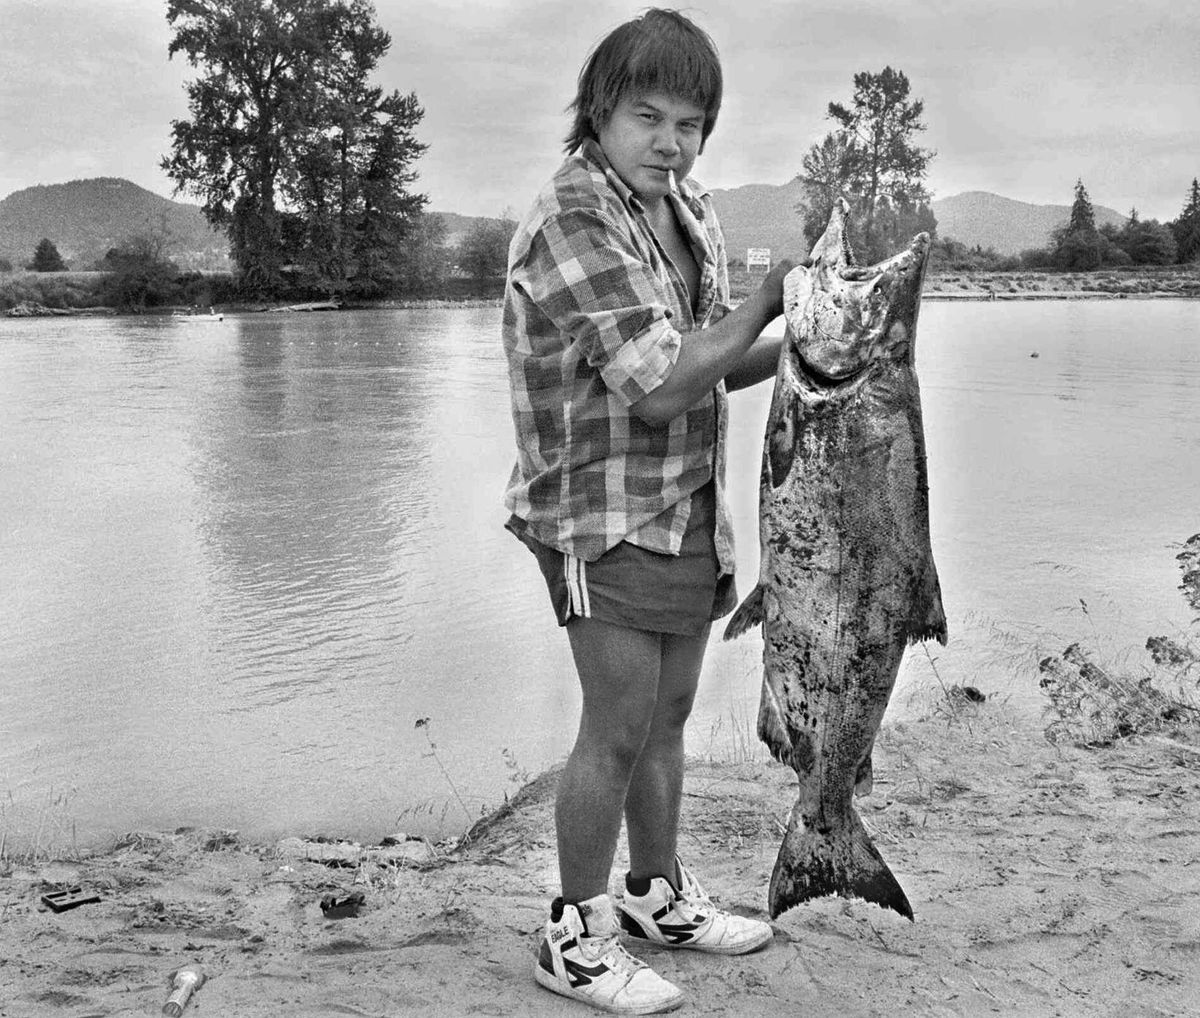 Tribal fisherman Randy Fornsby hoists a chinook salmon on the bank of the Skagit River west of Mount Vernon, Wash., Sept. 2, 1987. The Swinomish and Upper Skagit tribes shared a fishing area just upriver from where the Skagit breaks into its north and south forks. (Scott Terrell)